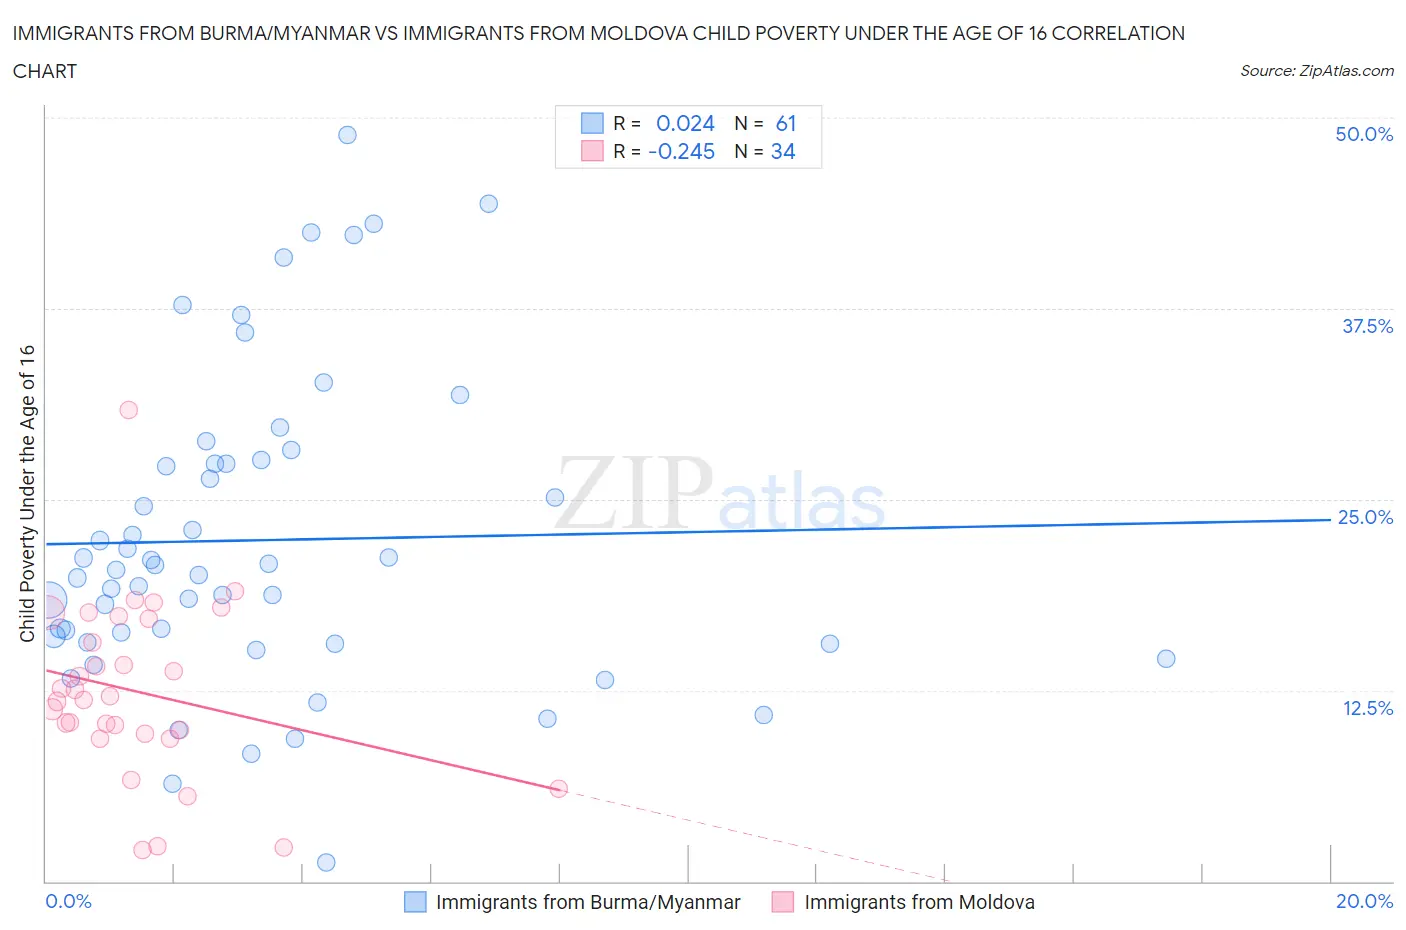 Immigrants from Burma/Myanmar vs Immigrants from Moldova Child Poverty Under the Age of 16